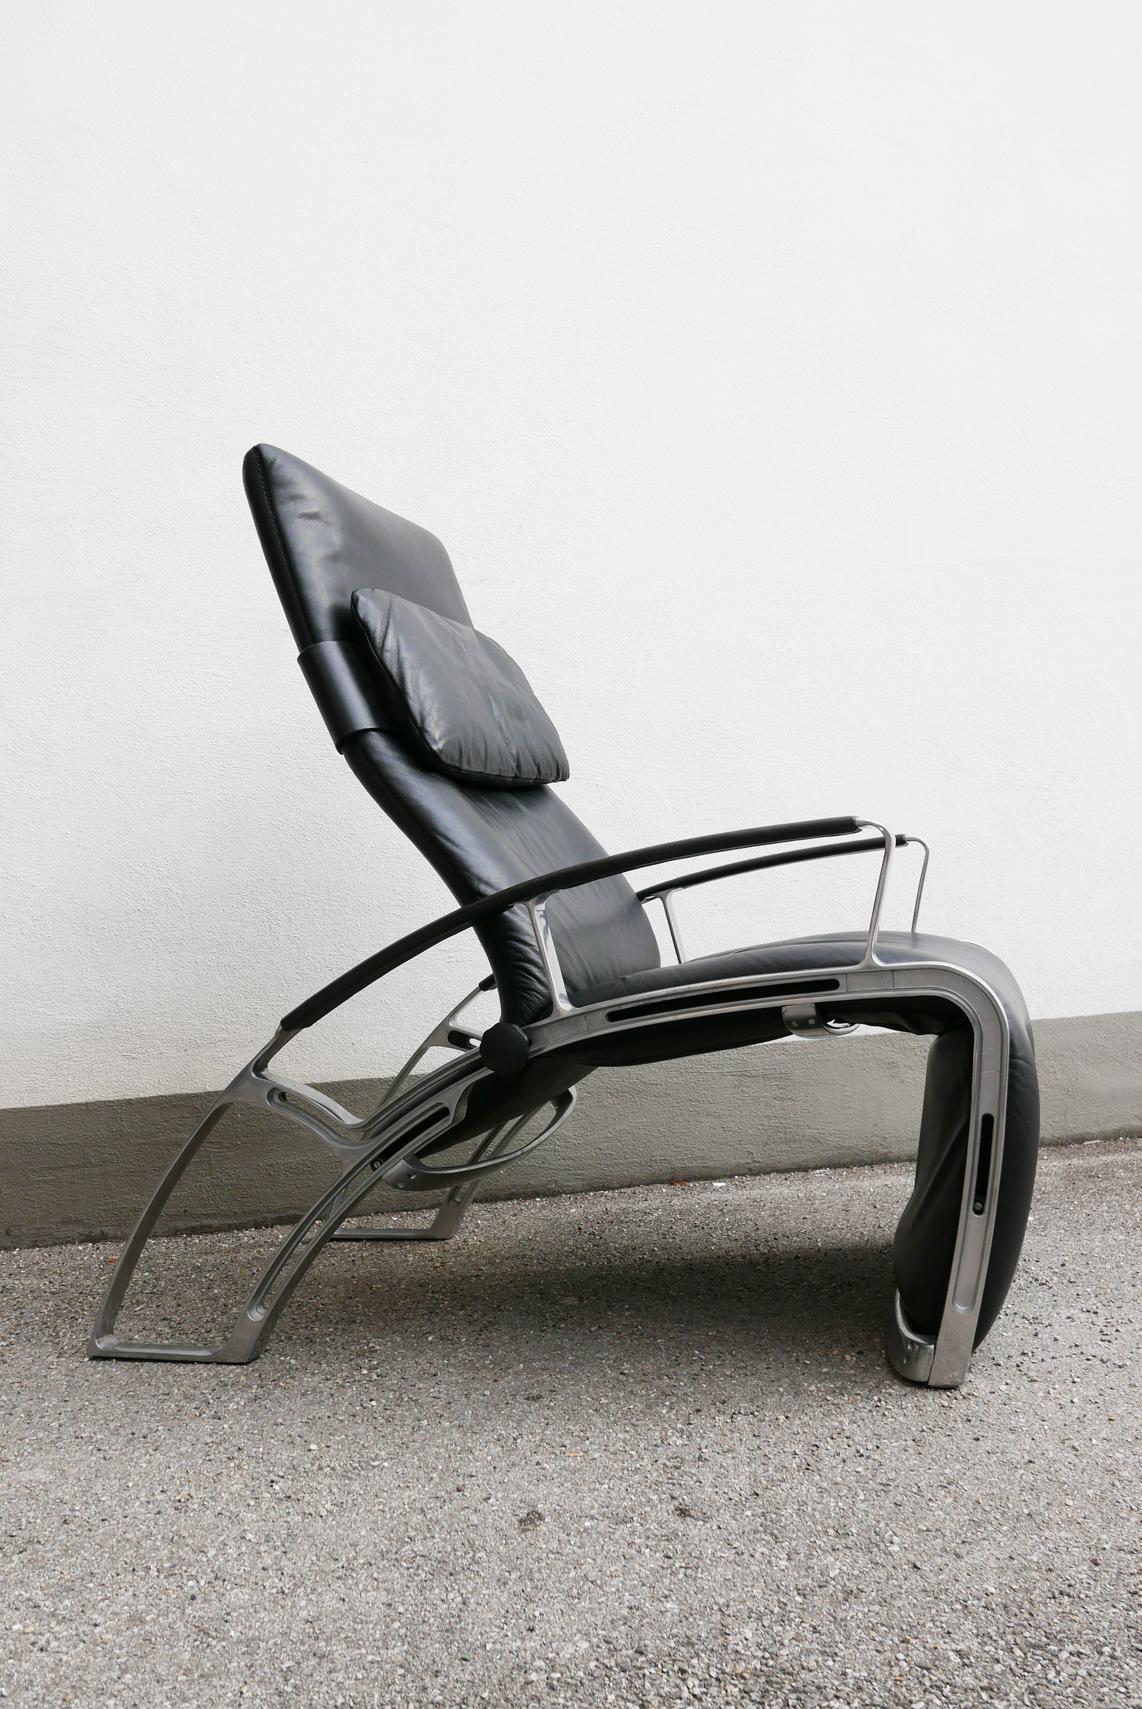 Exceptional Mid-Century Modern lounge chair 'IP84S'. Designed by Ferdinand A. Porsche, 1984. Manufactured by Interprofil GmbH, Fernwald, 1980s, Germany.

Executed in leather and cast aluminium.

Dimensions:
Height: 45.67 in. (116 cm)
Width: 28.75